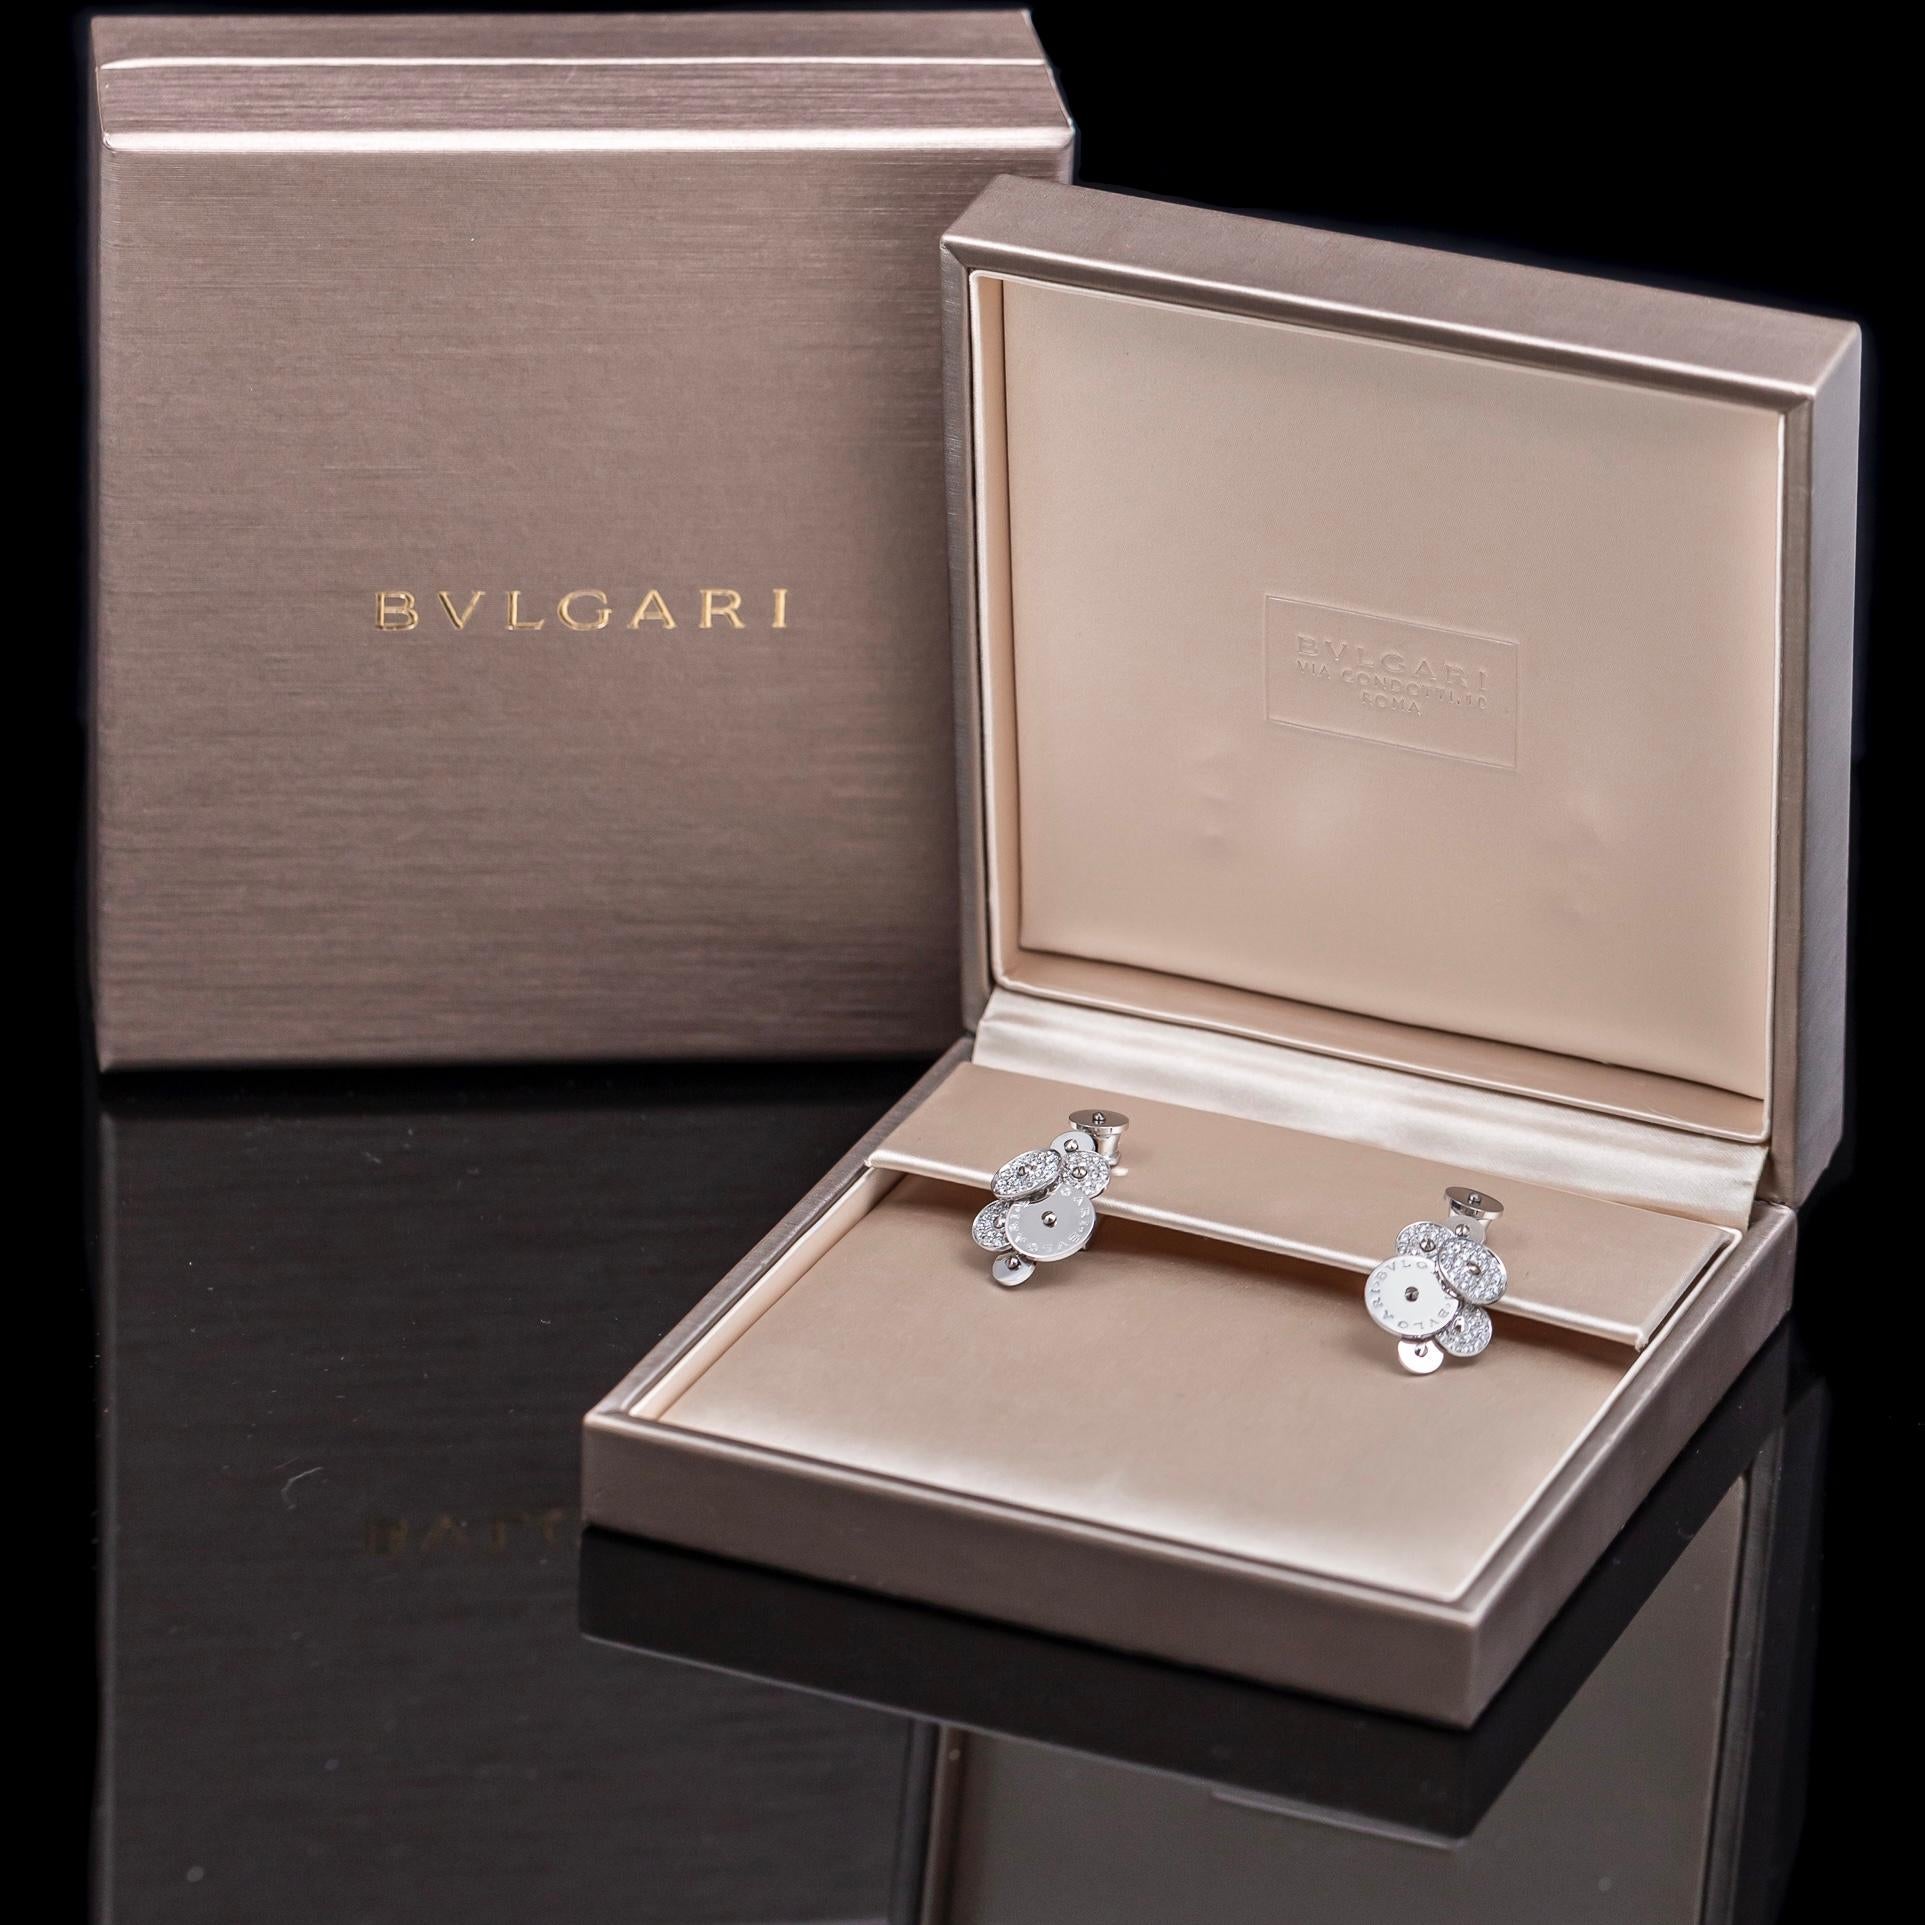 Bvlgari Cicladi diamond disk pendant earrings in 18kt white gold, Italy, from March 2023, Unworn, Full Set (Box, Outer Box and Papers/Certificate of Authenticity). A perfect accessory for a modern look, each earring is composed by seven white gold